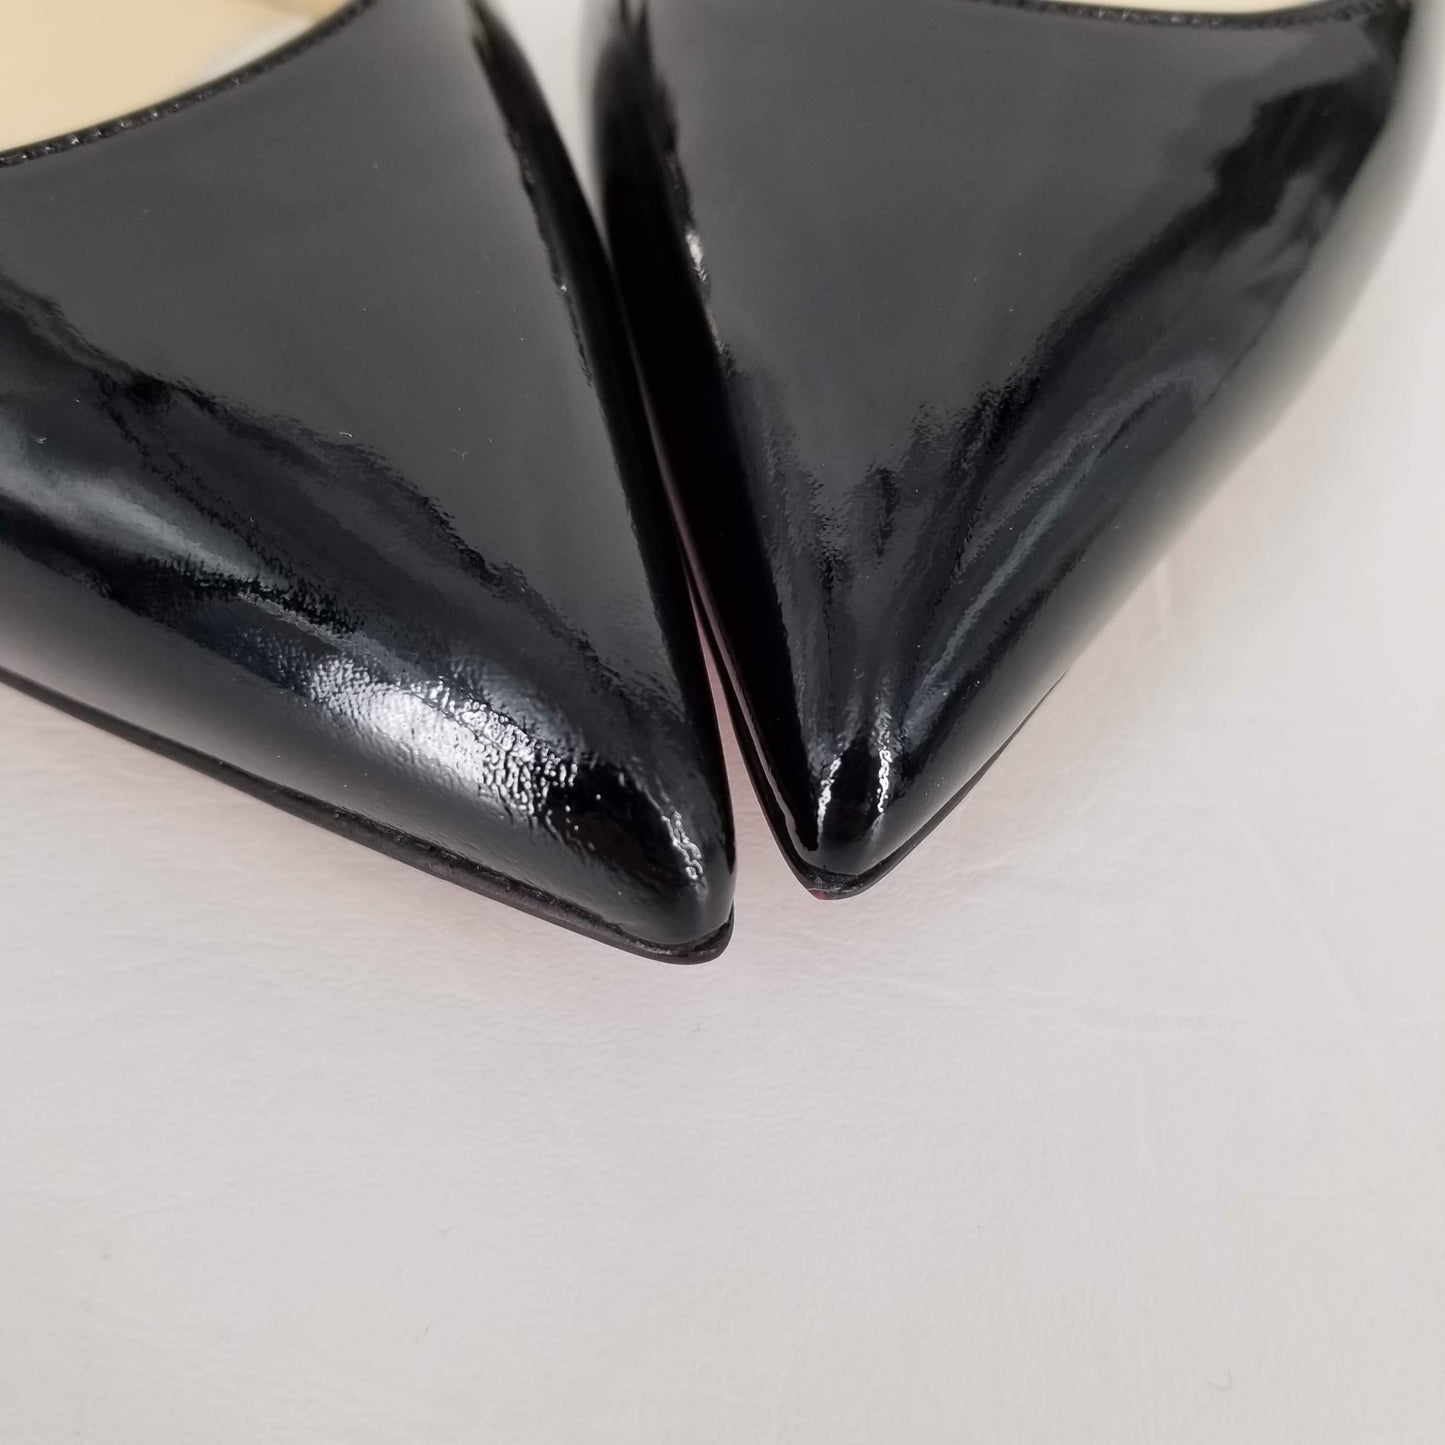 Authentic Christian Louboutin Black Patent/Silver Flats